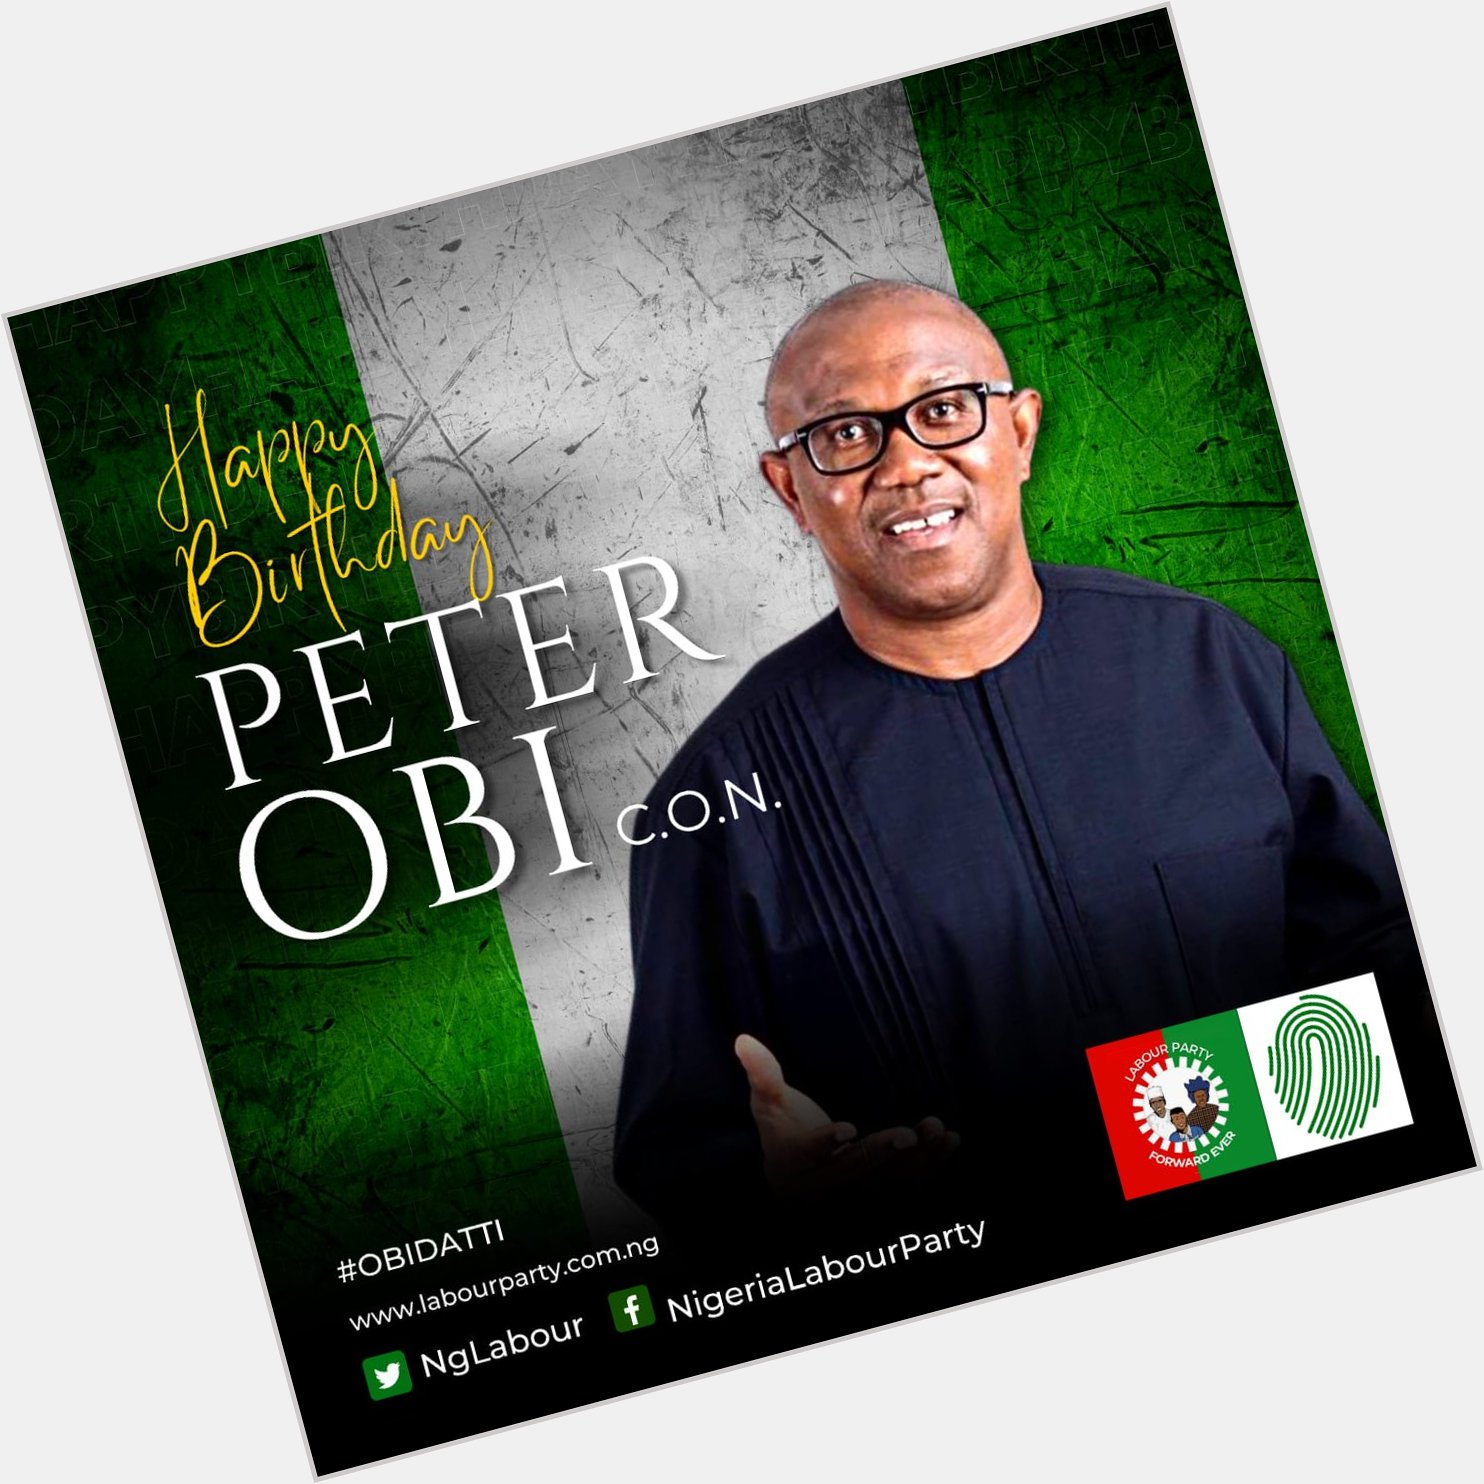 Happy Birthday Peter Obi, Labour Party Presidential Candidate. More Wins. 